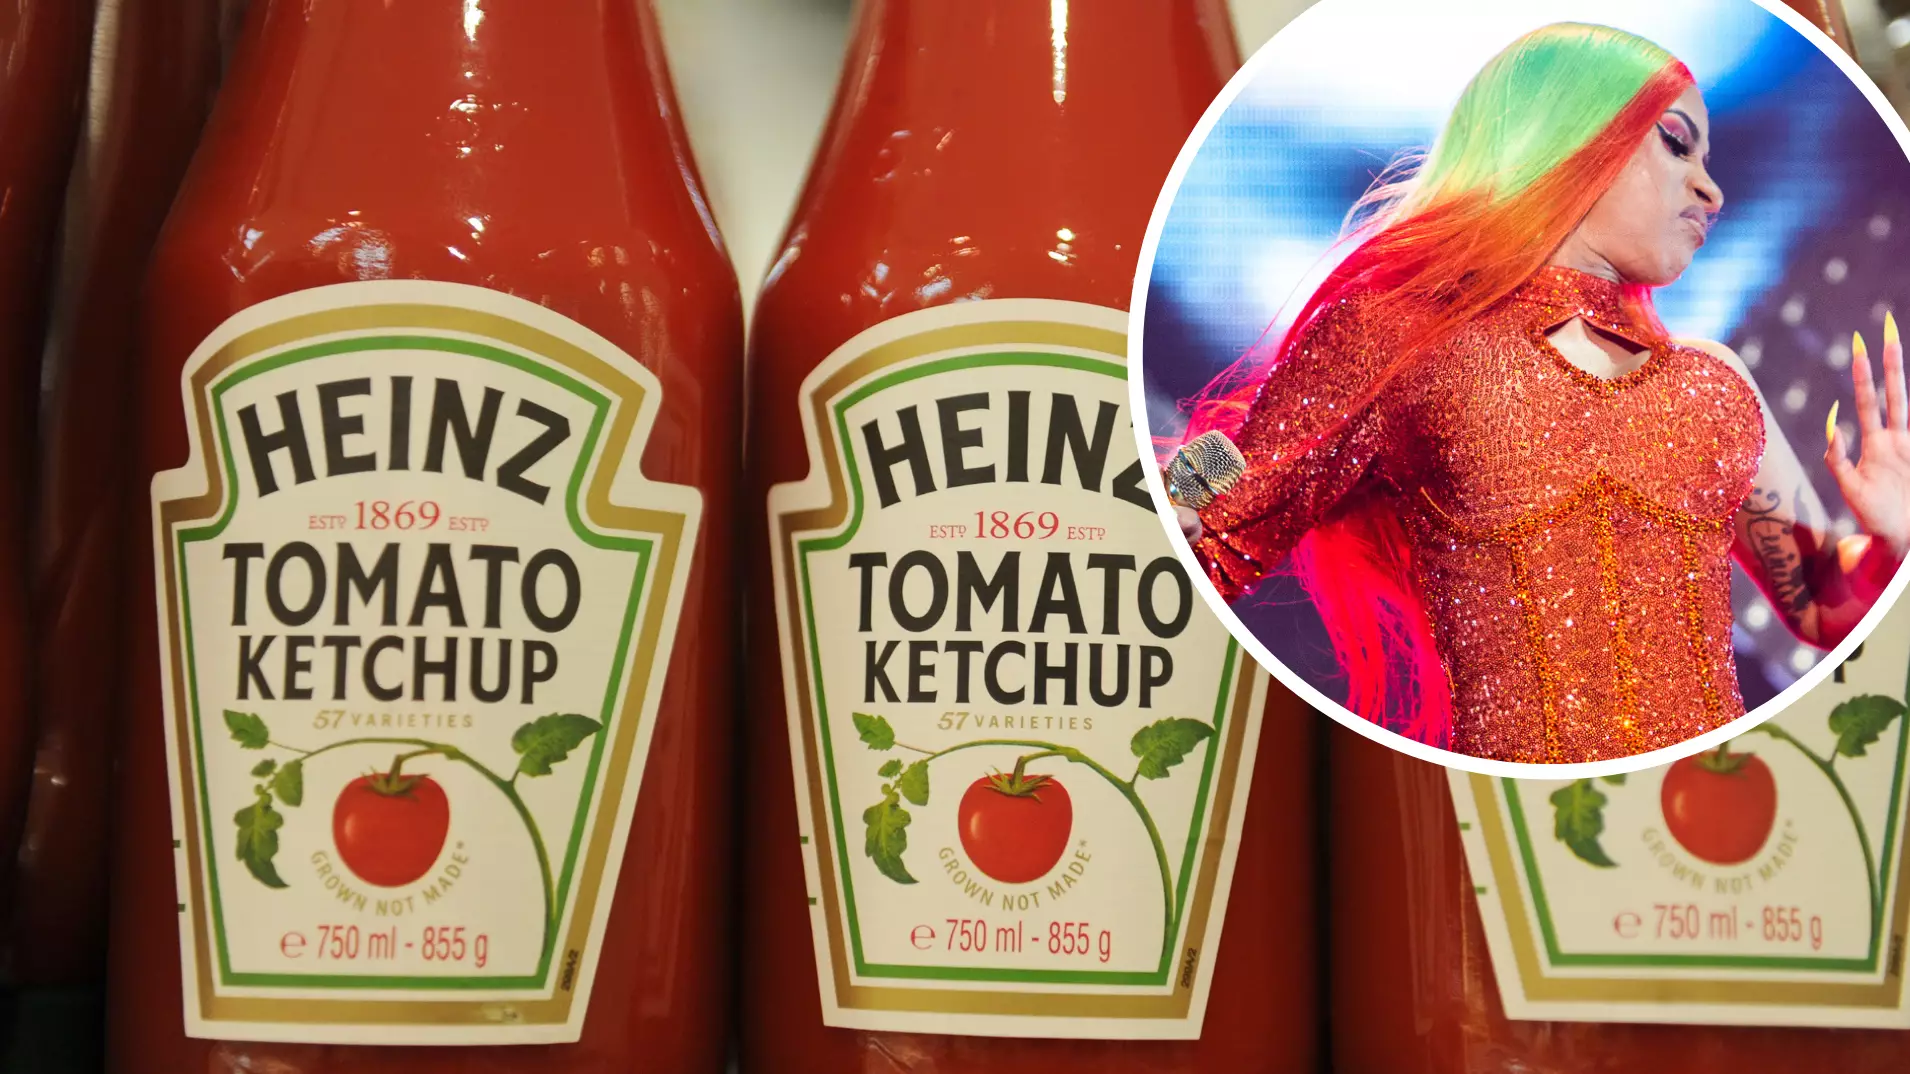 Cardi B Doesn't Keep Her Ketchup In The Fridge And Fans Are Not Happy